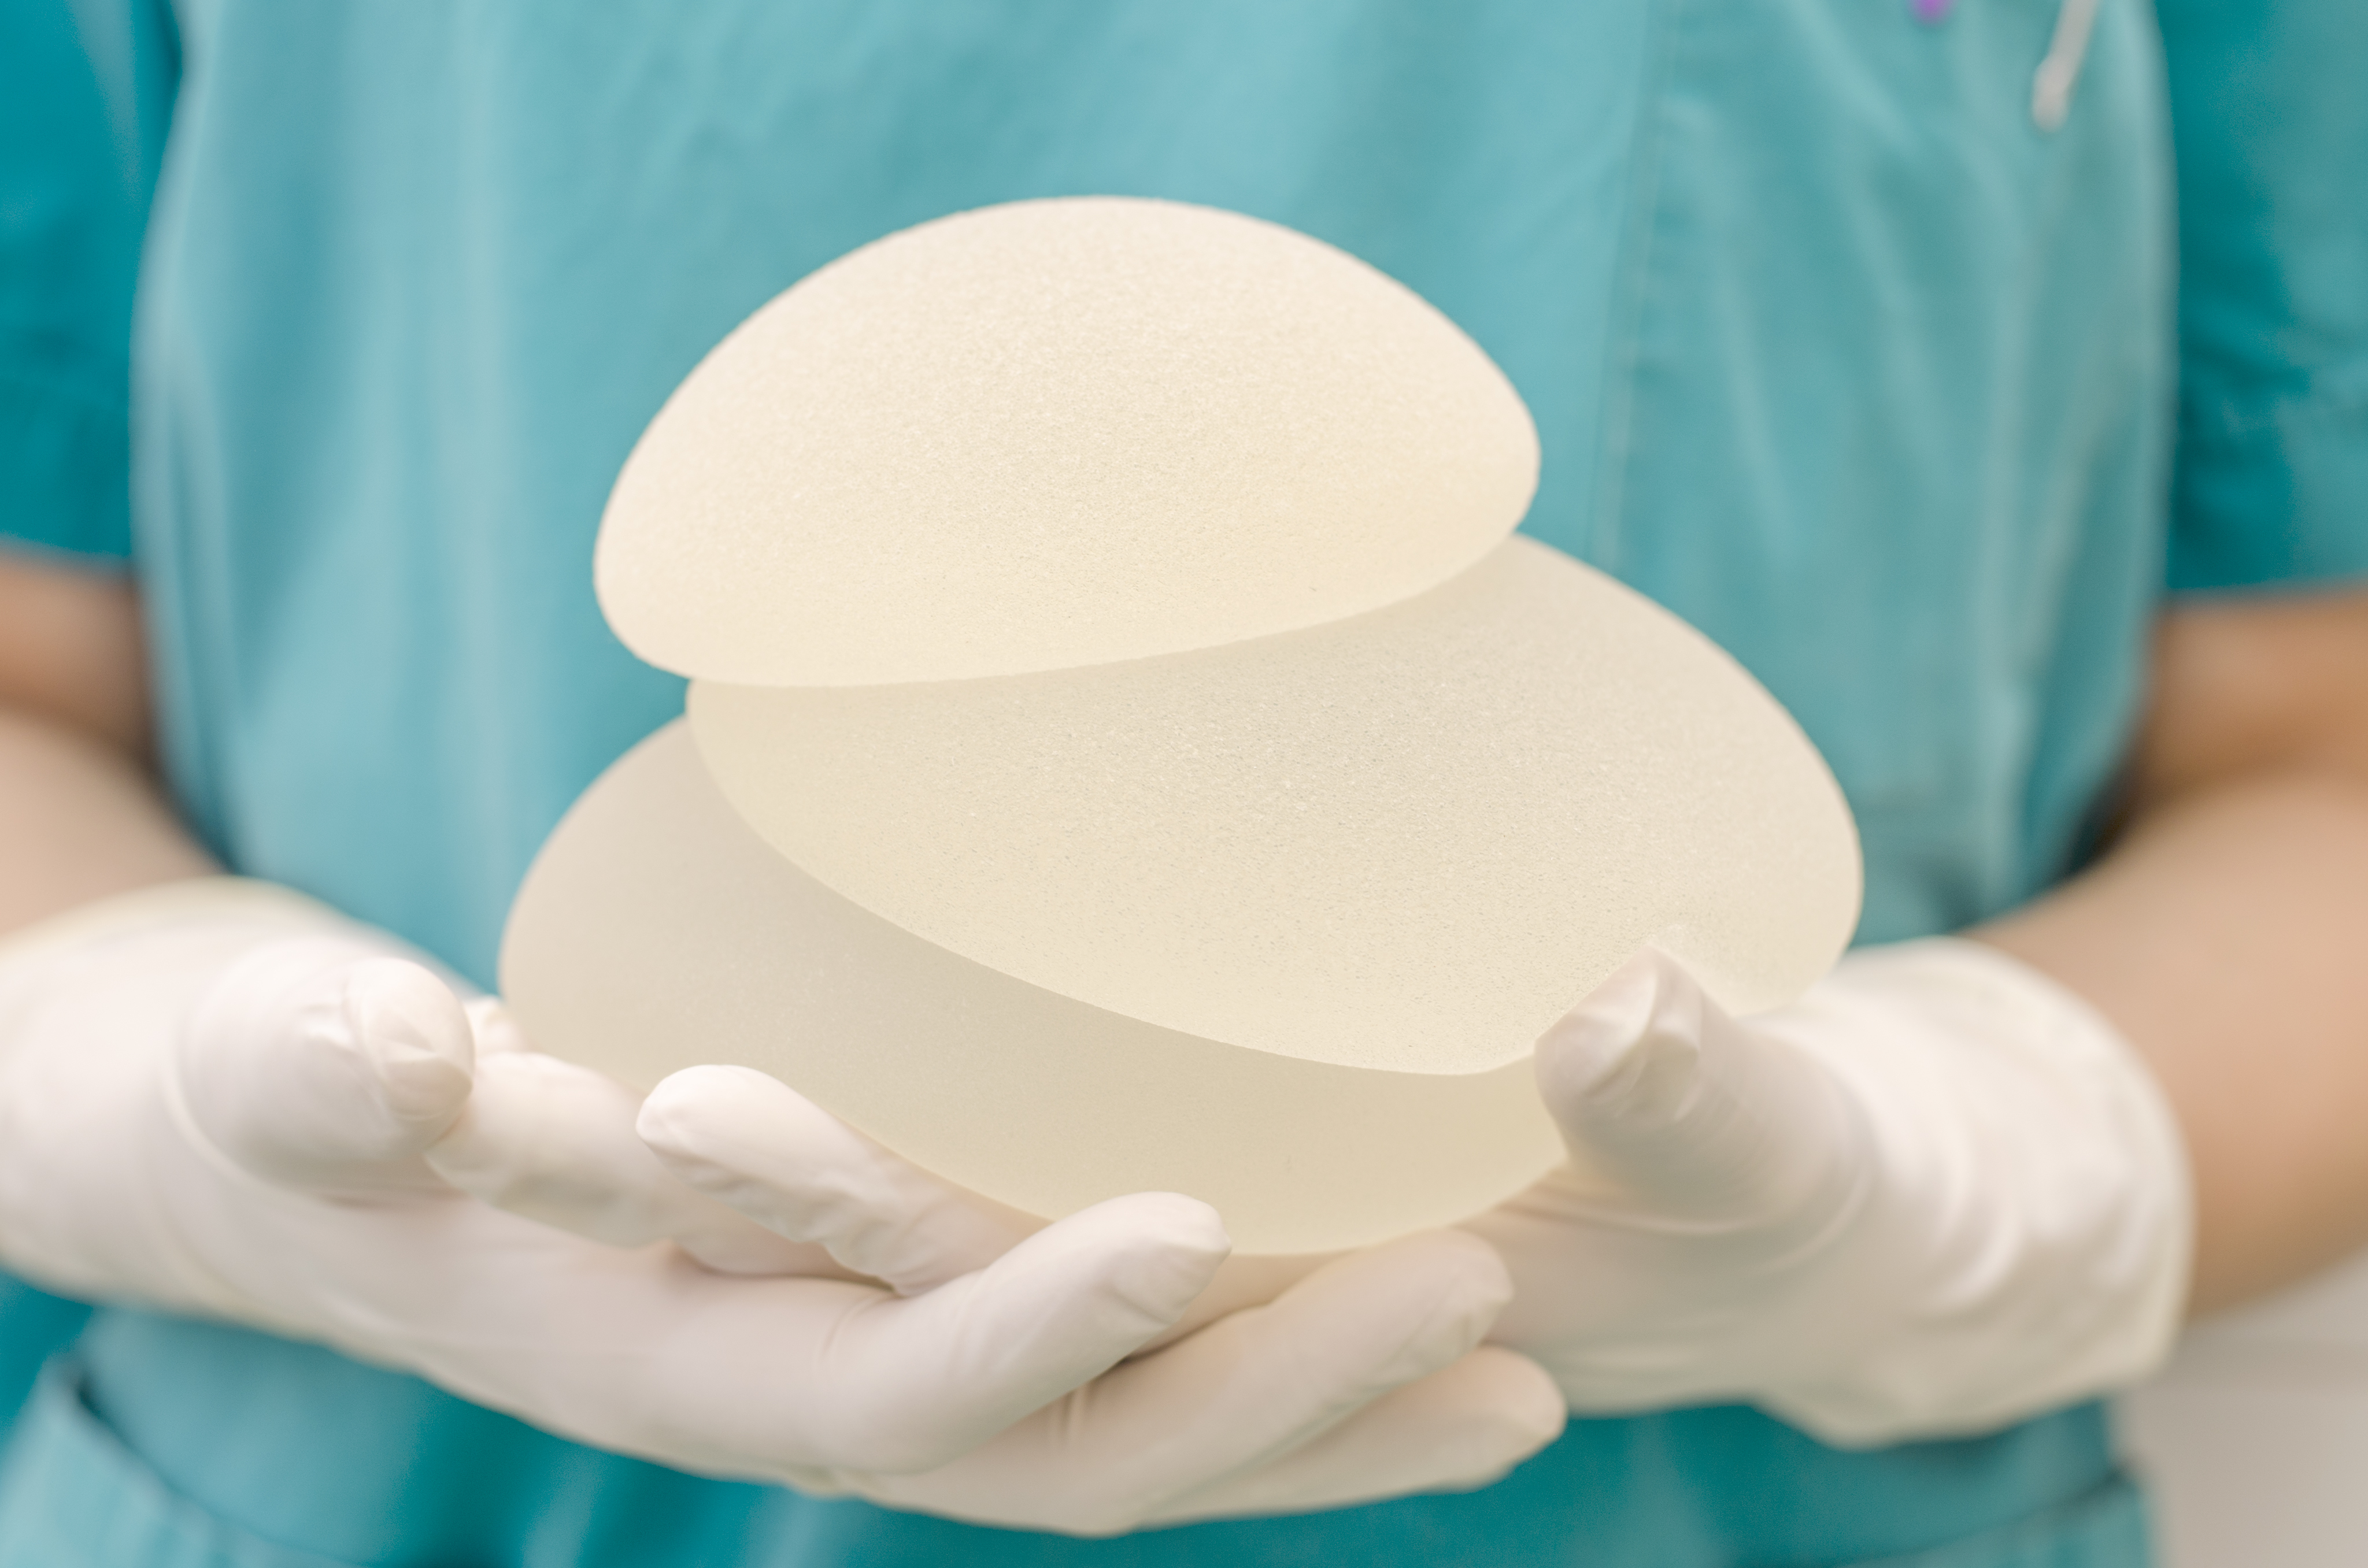 Medical Device Alert - Silicone gel filled breast implants manufactured by Poly Implant Prothese